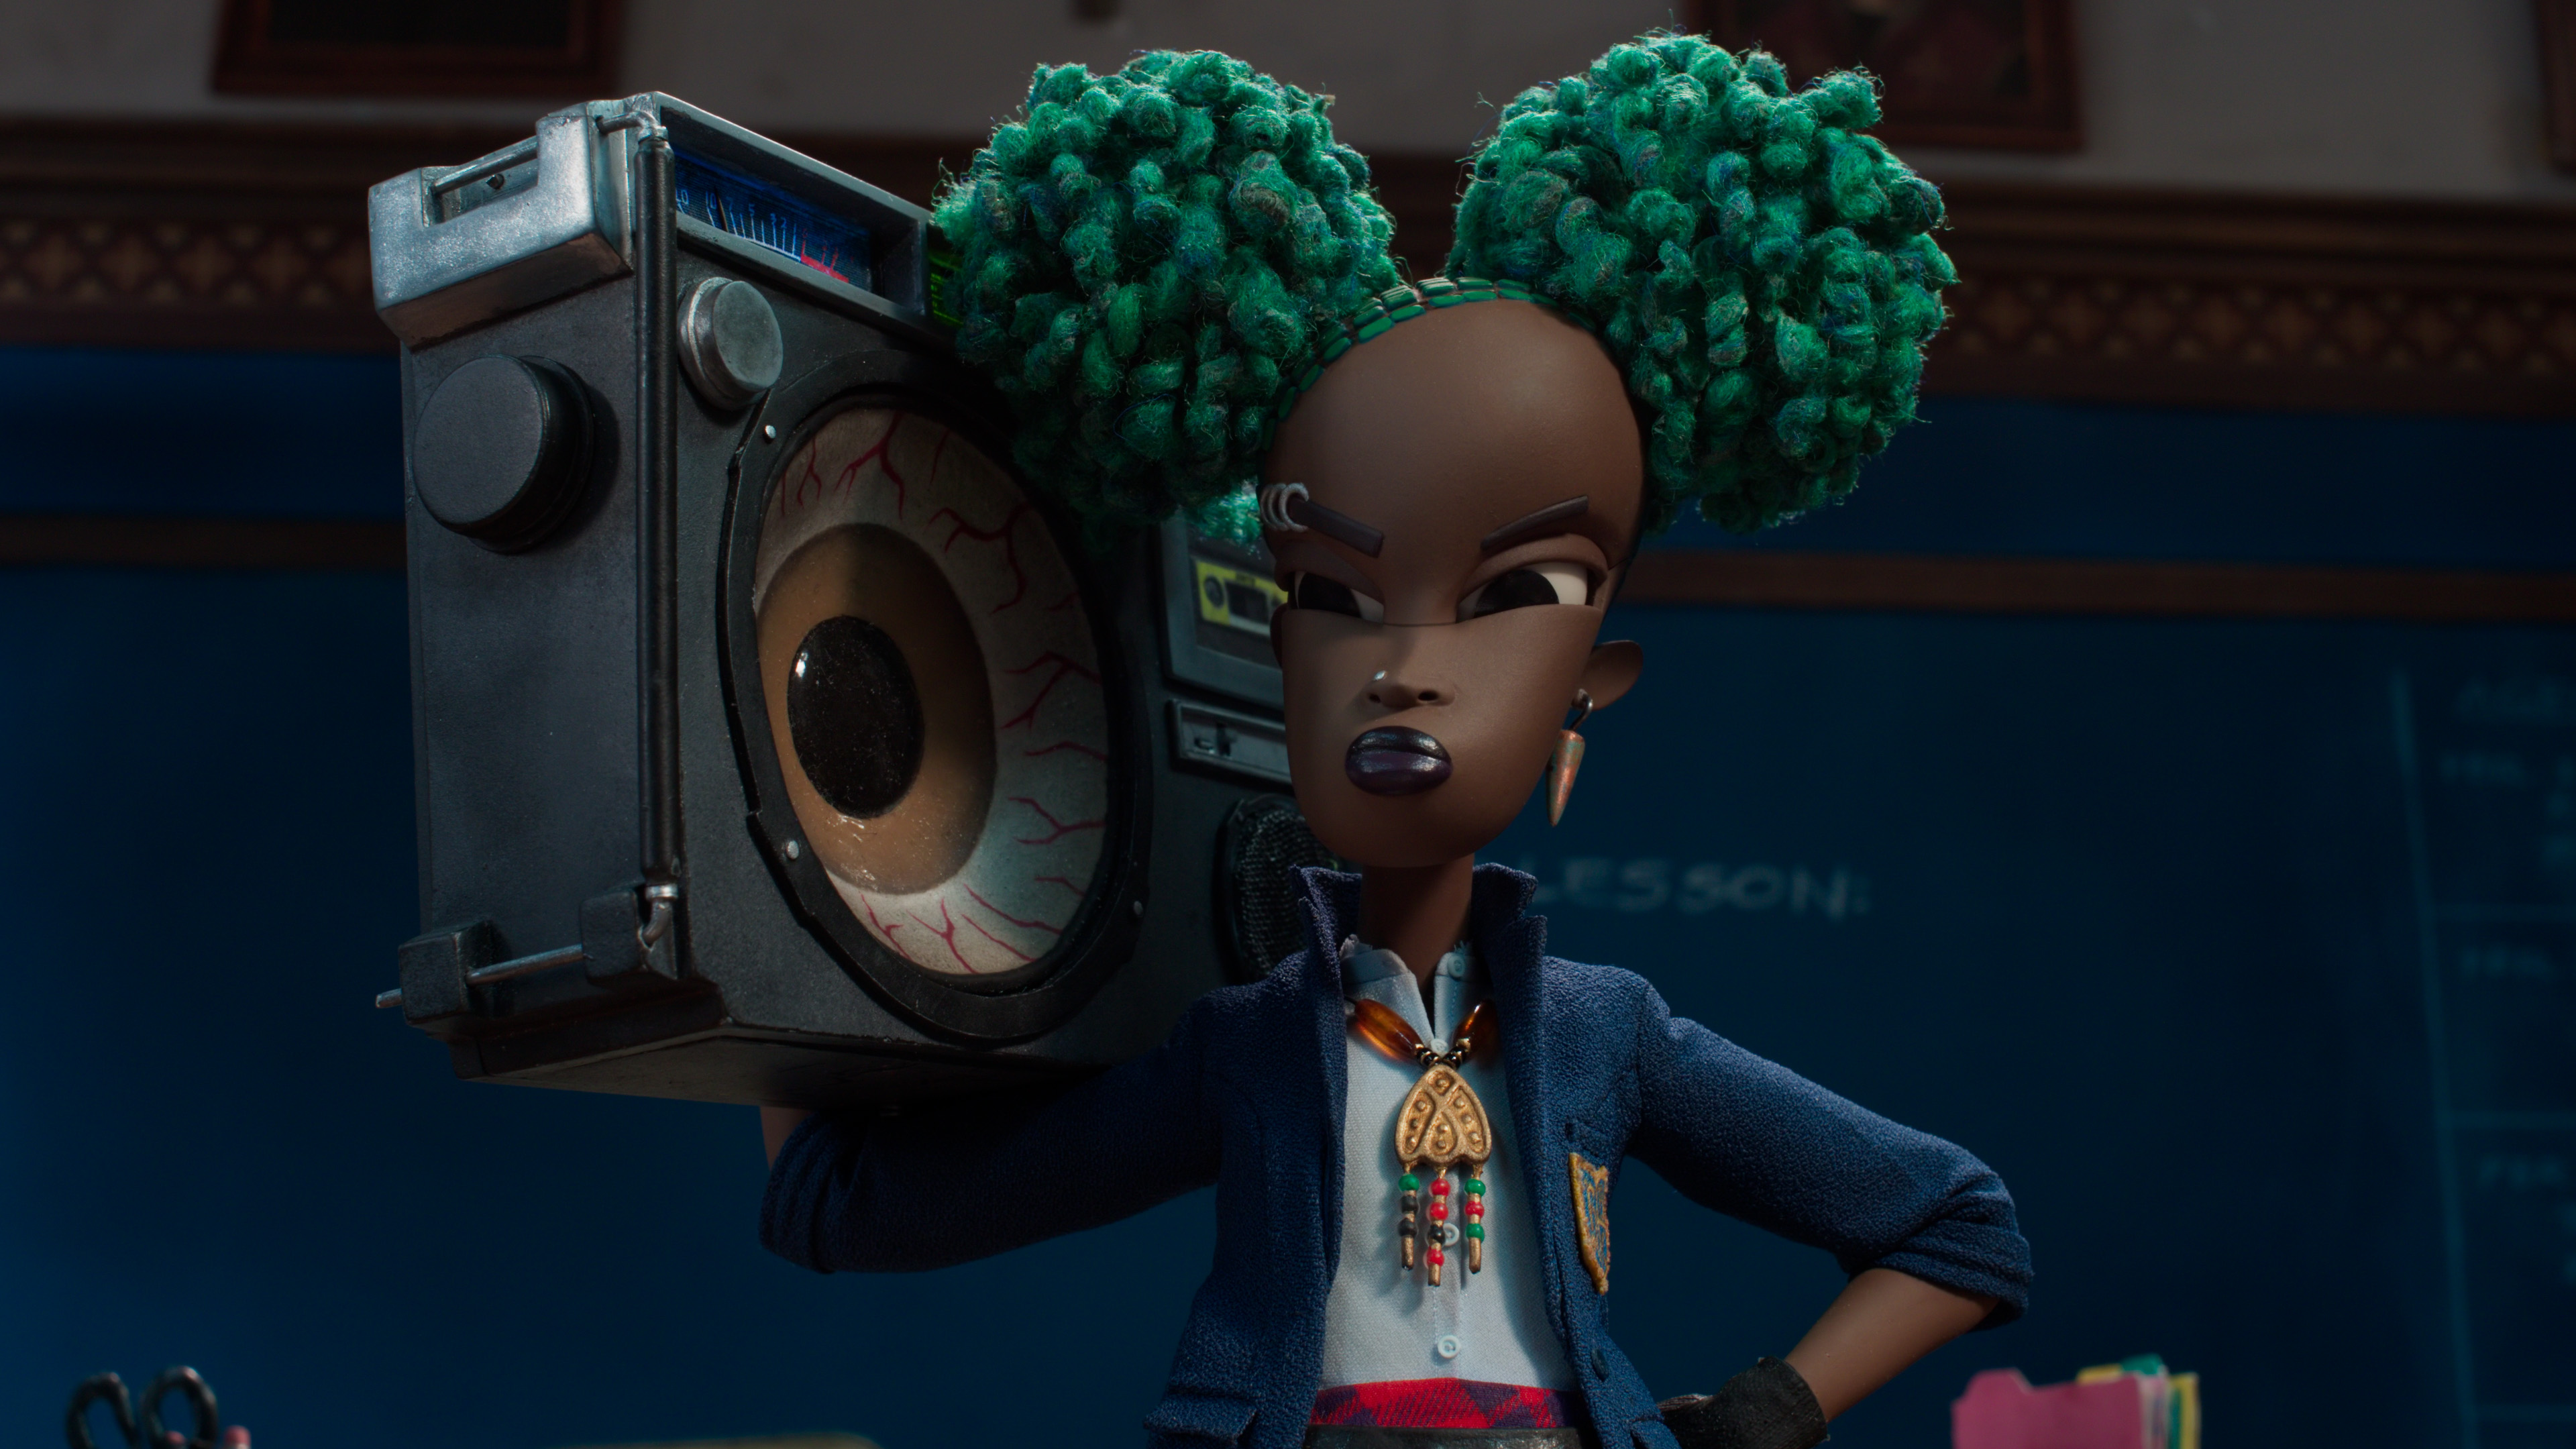 A girl with green afro puff hair holds a boombox with a gigantic eye poking out of one of its speakers on her shoulder.